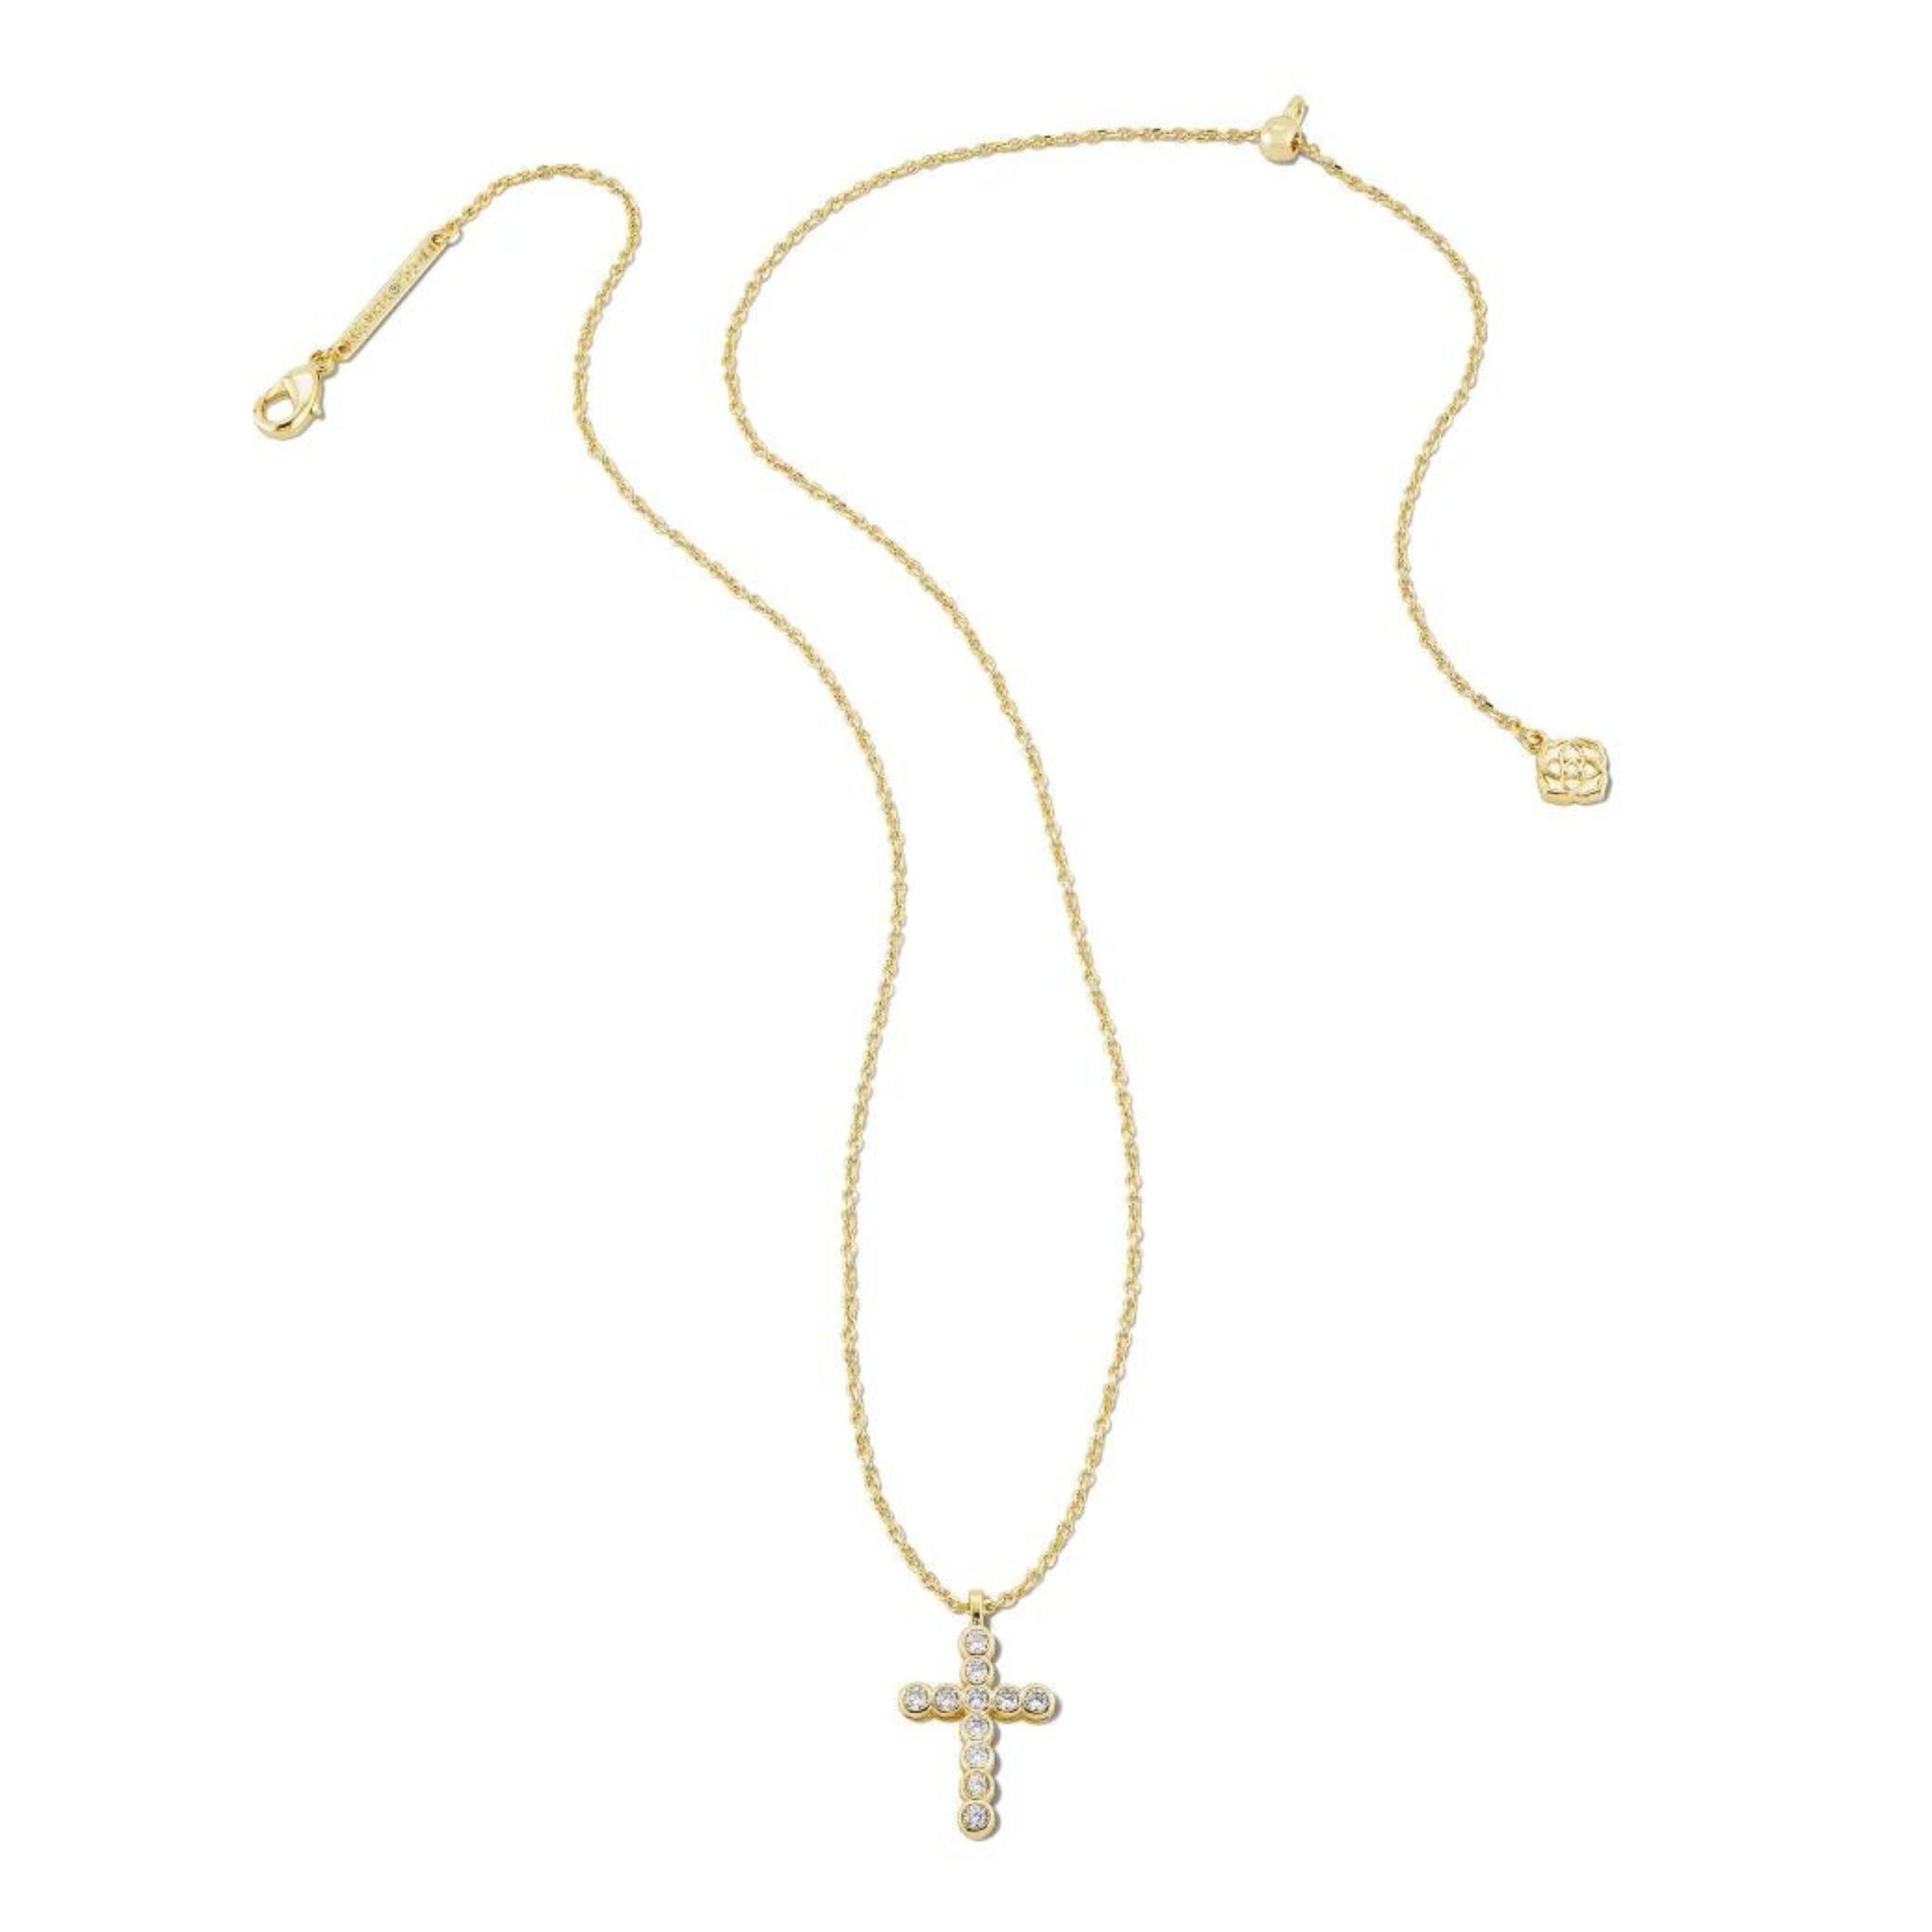 Kendra Scott | Cross Gold Pendant Necklace in White Crystal - Giddy Up Glamour Boutique